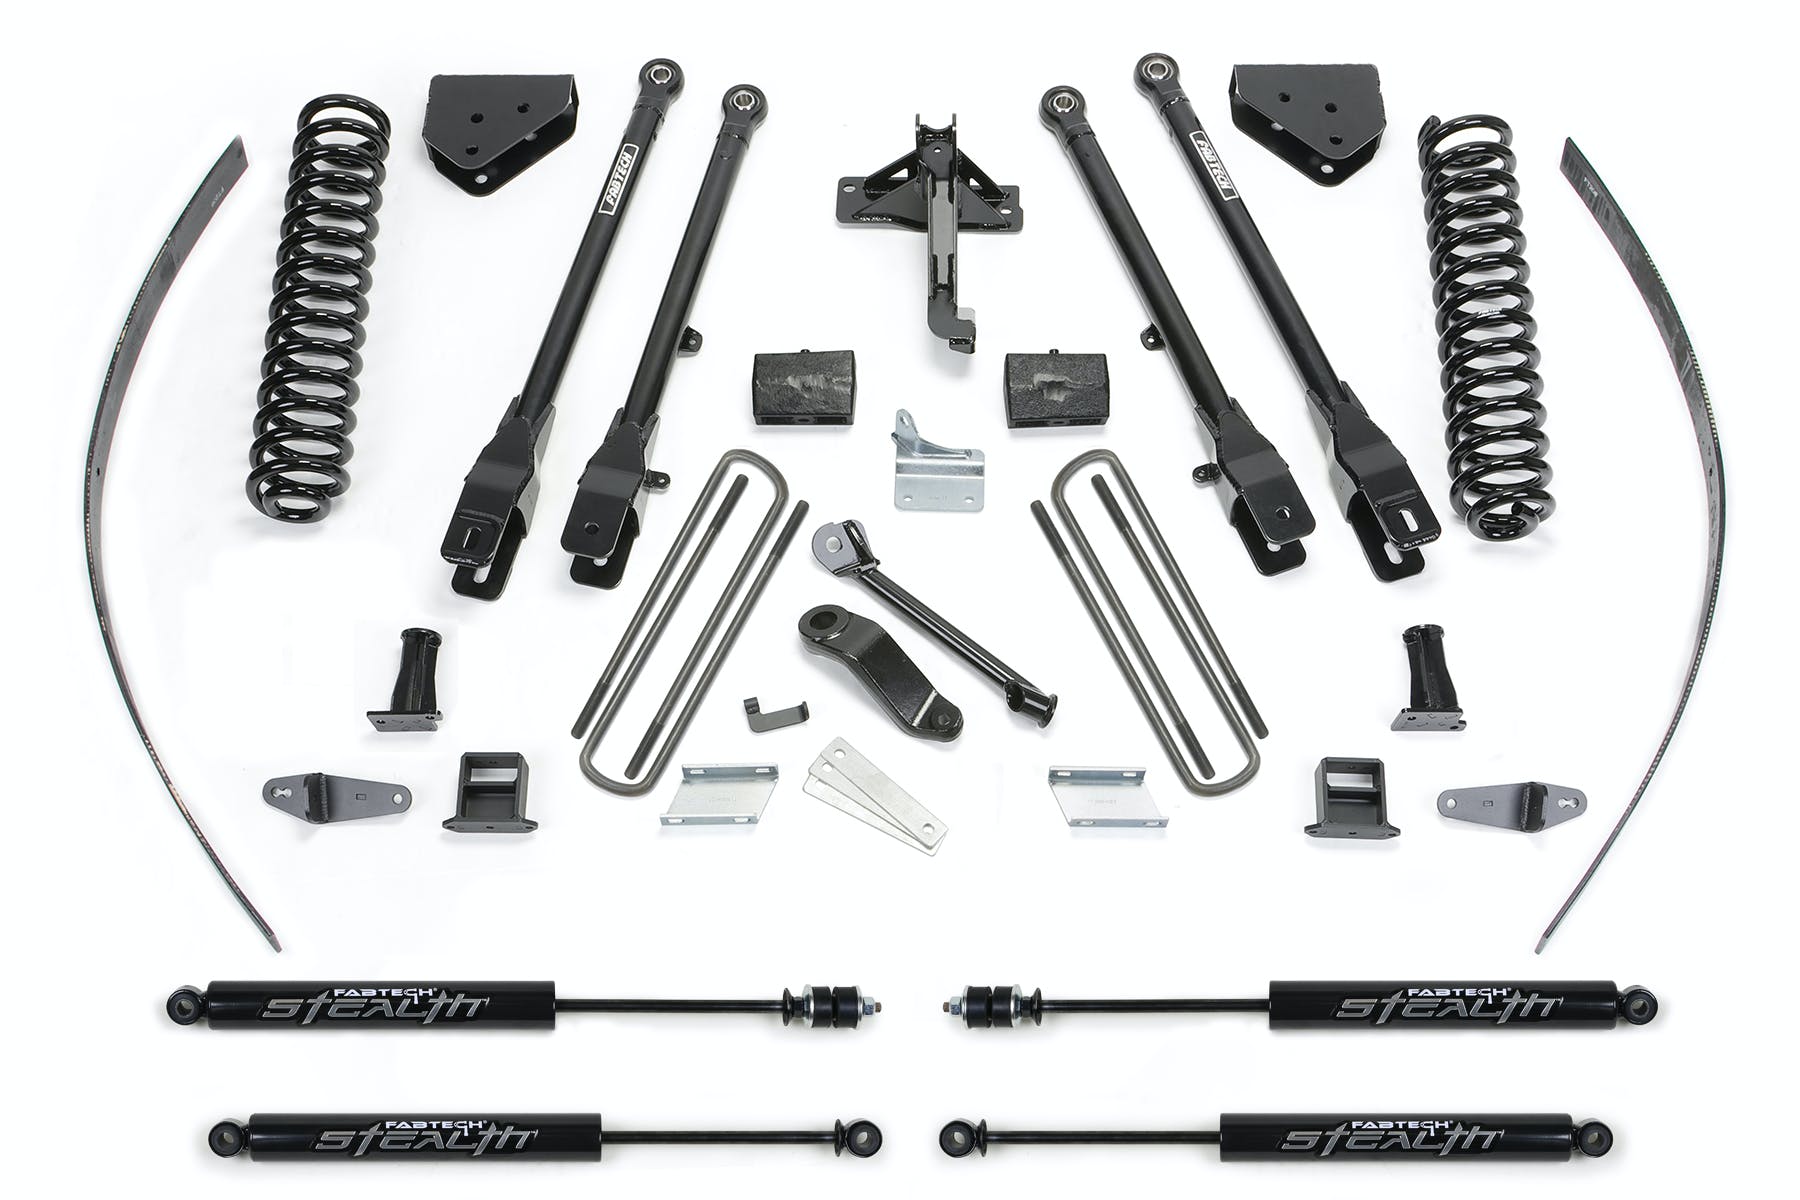 Fabtech K2125M 8in. 4LINK SYS W/COILS/STEALTH 2008-15 FORD F250 4WD W/O FACTORY OVERLOAD